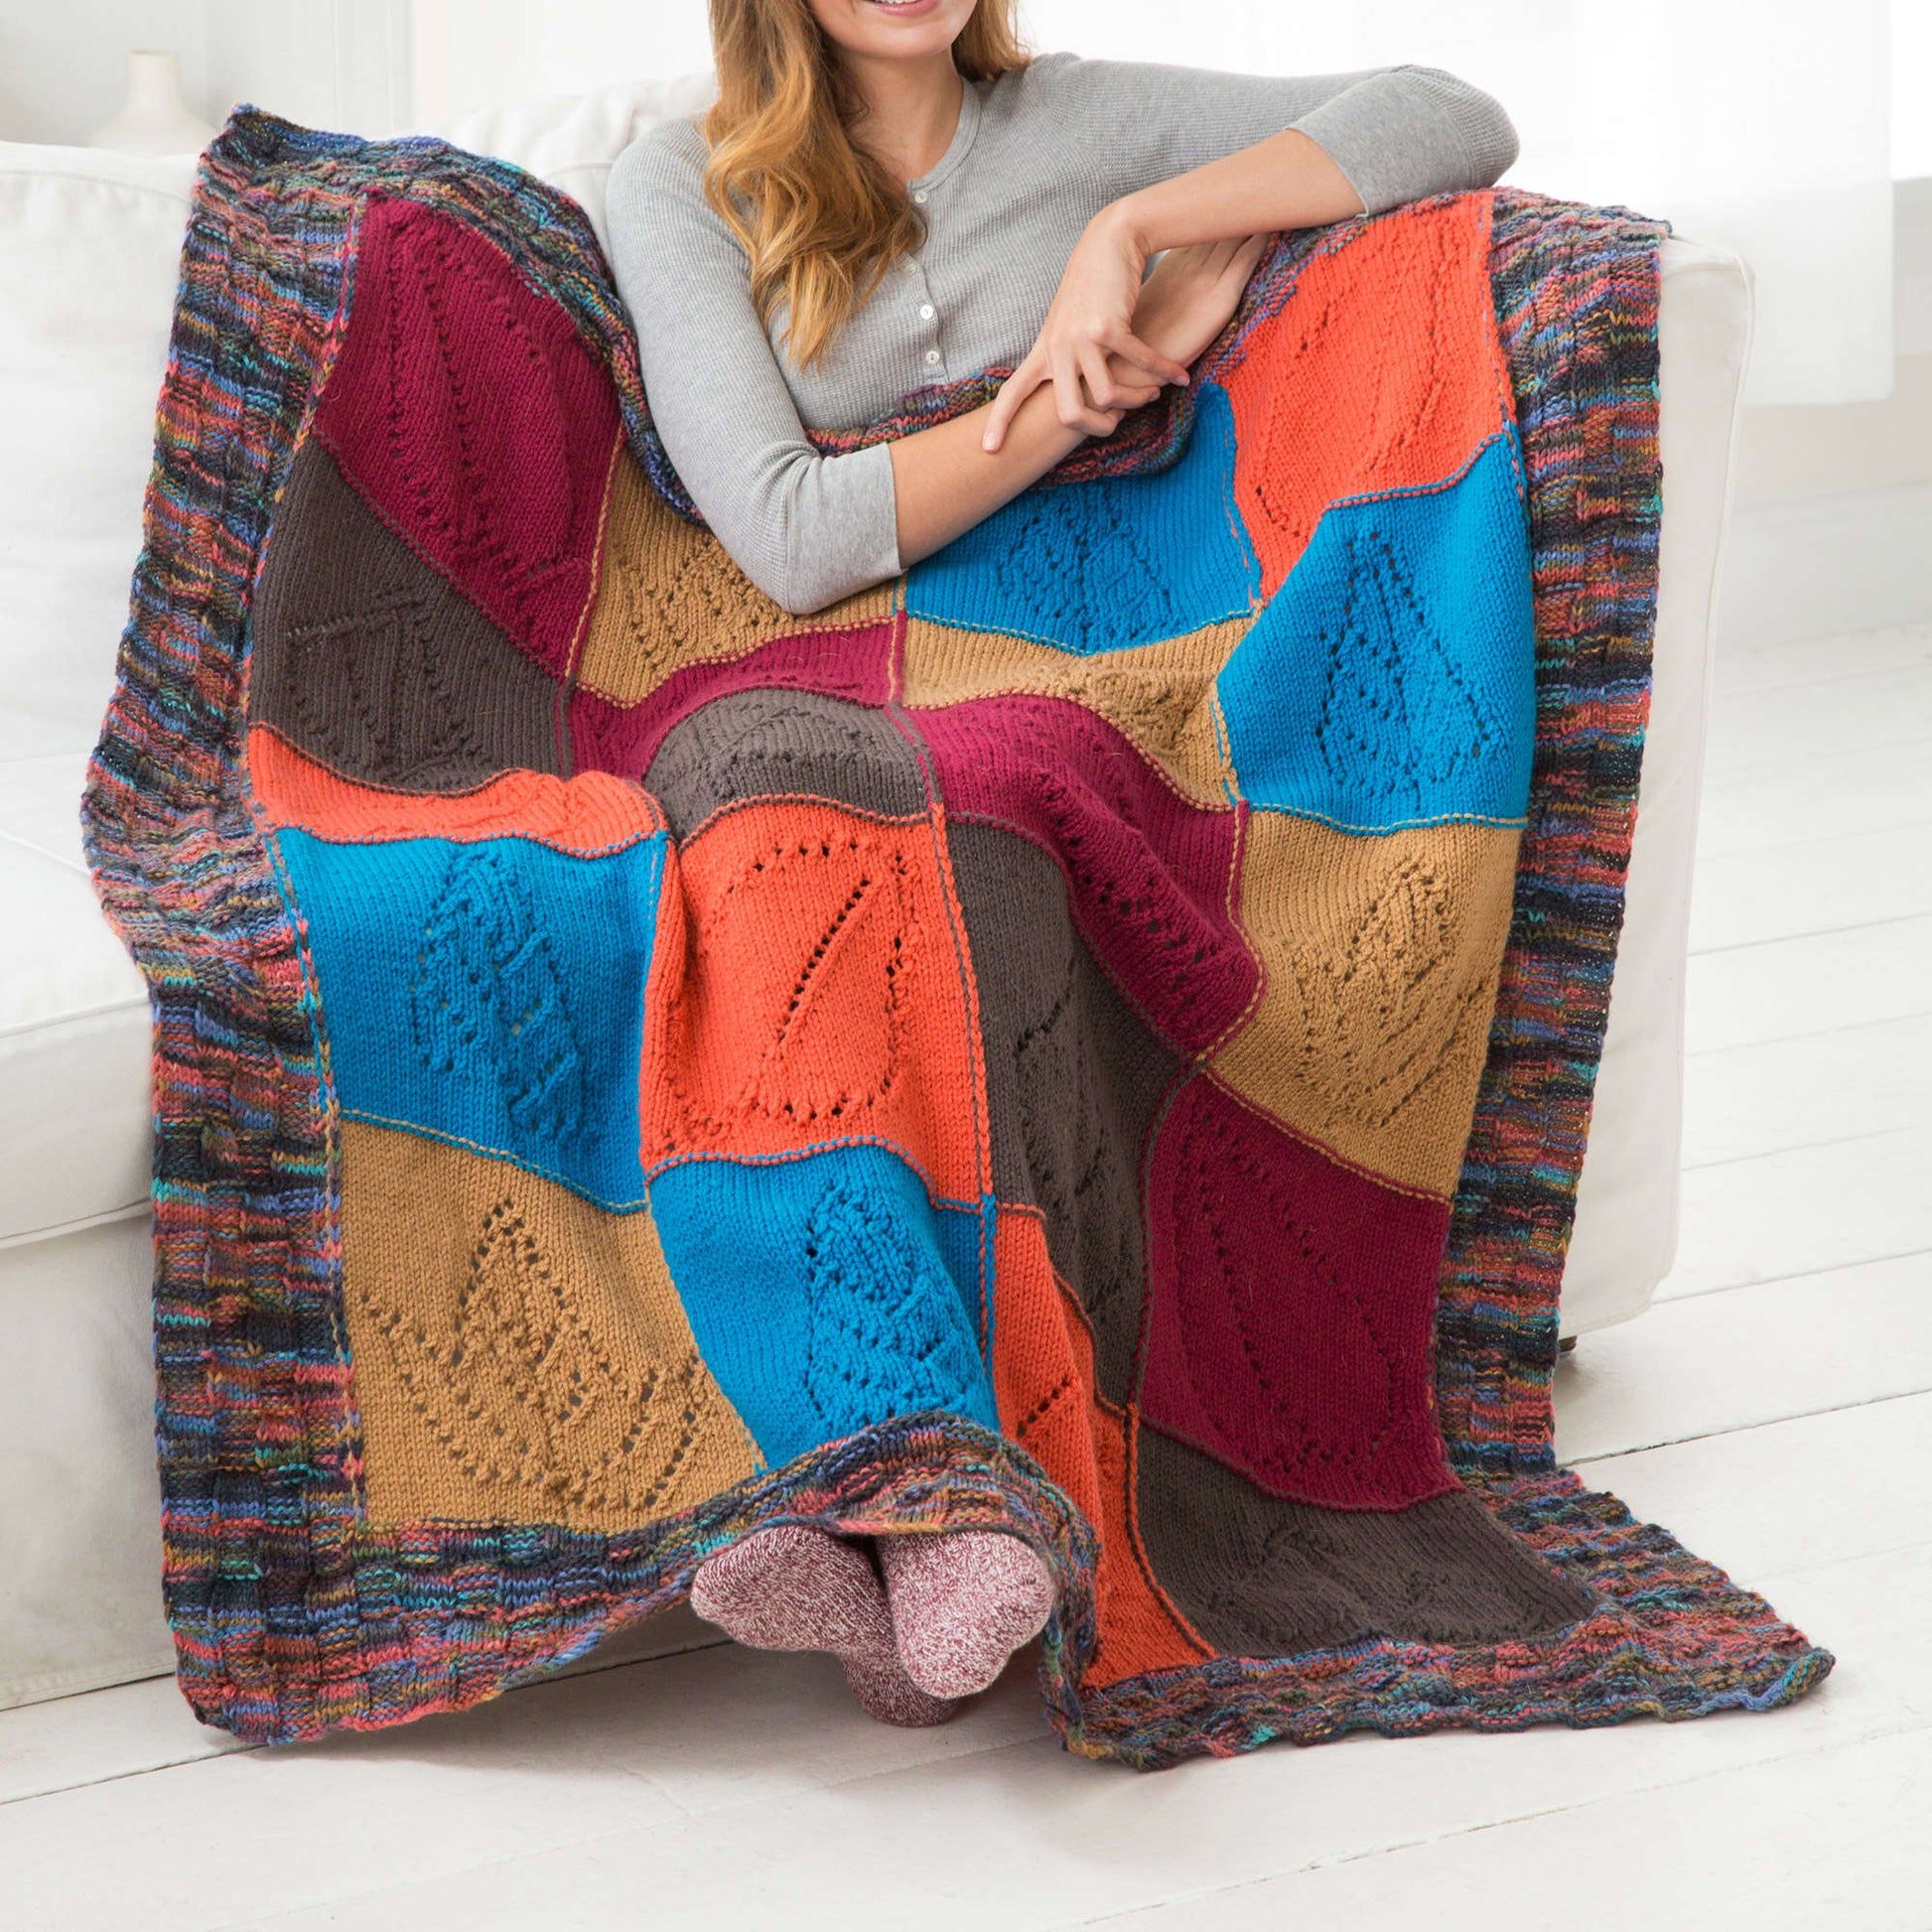 Free Red Heart Caring Comfort Knit Throw Pattern